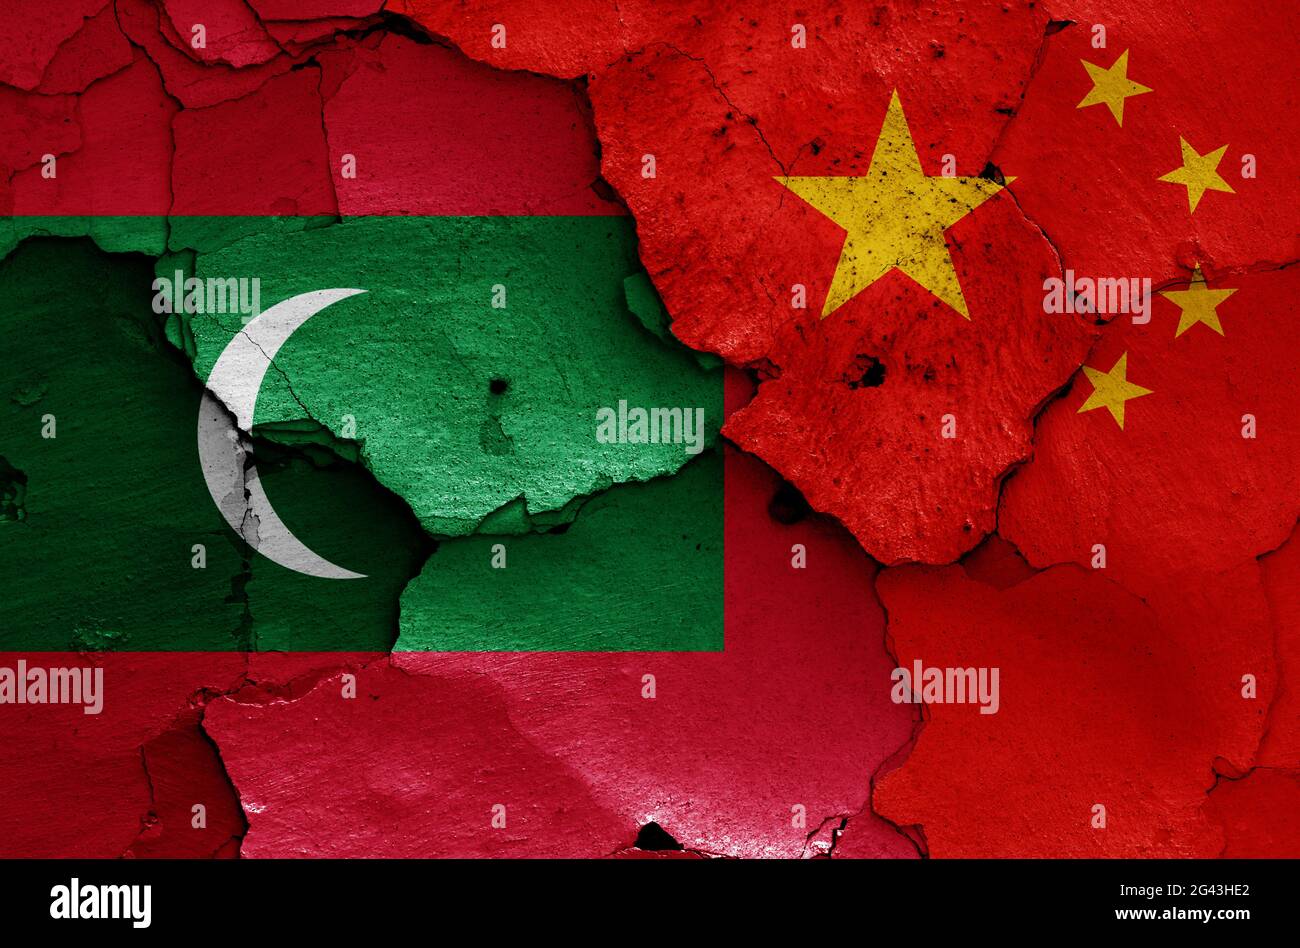 Flags of Maldives and China painted on cracked wall Stock Photo